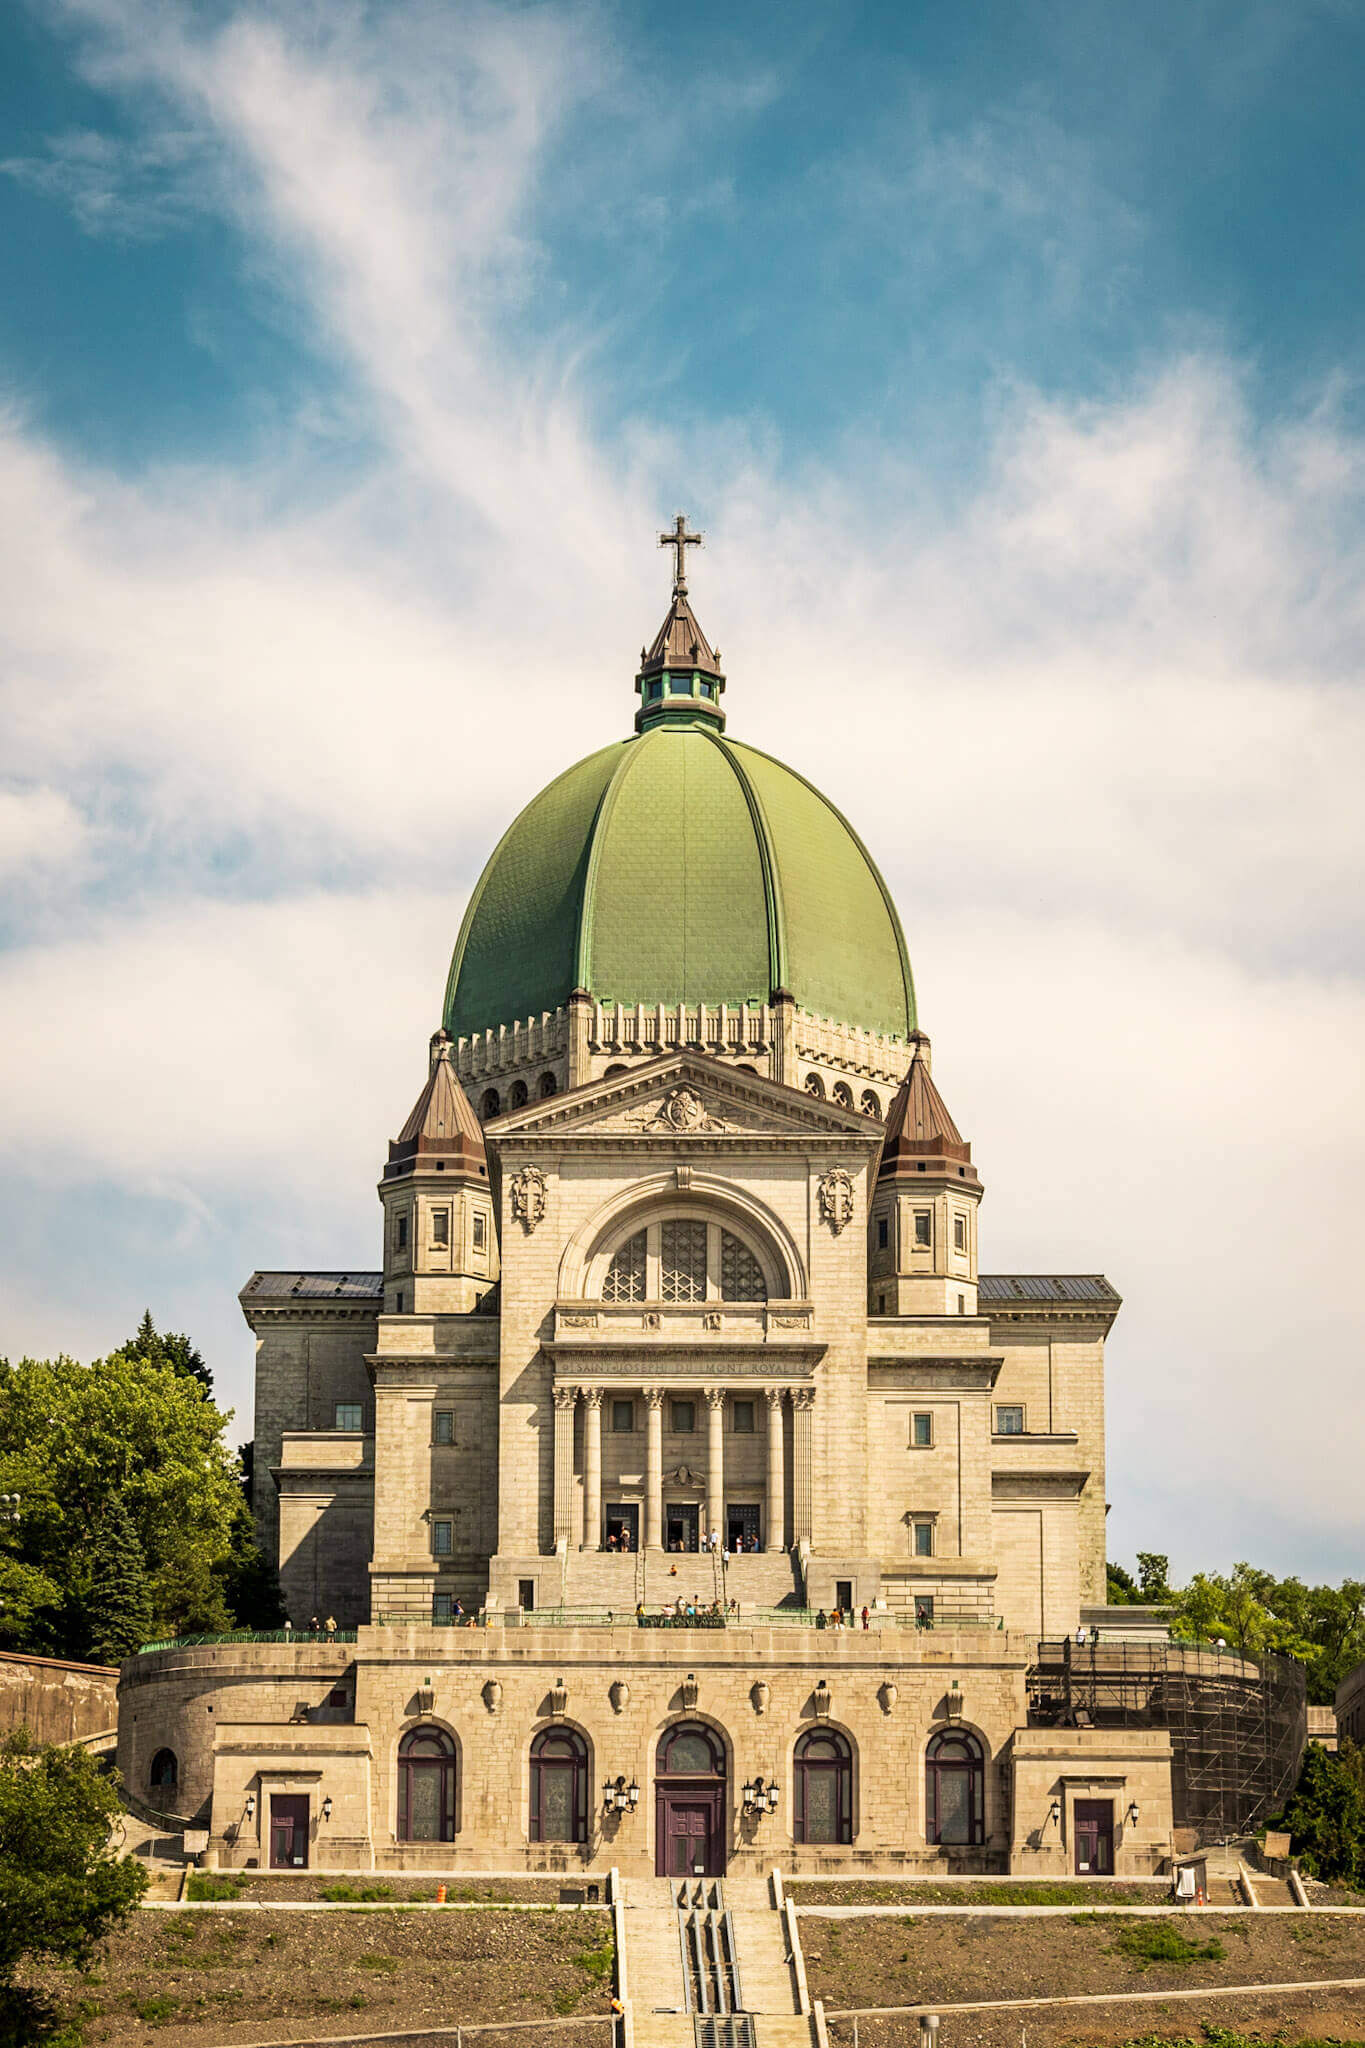 The front facade and dome of Saint Joseph's Oratory of Mount Royal in Montreal